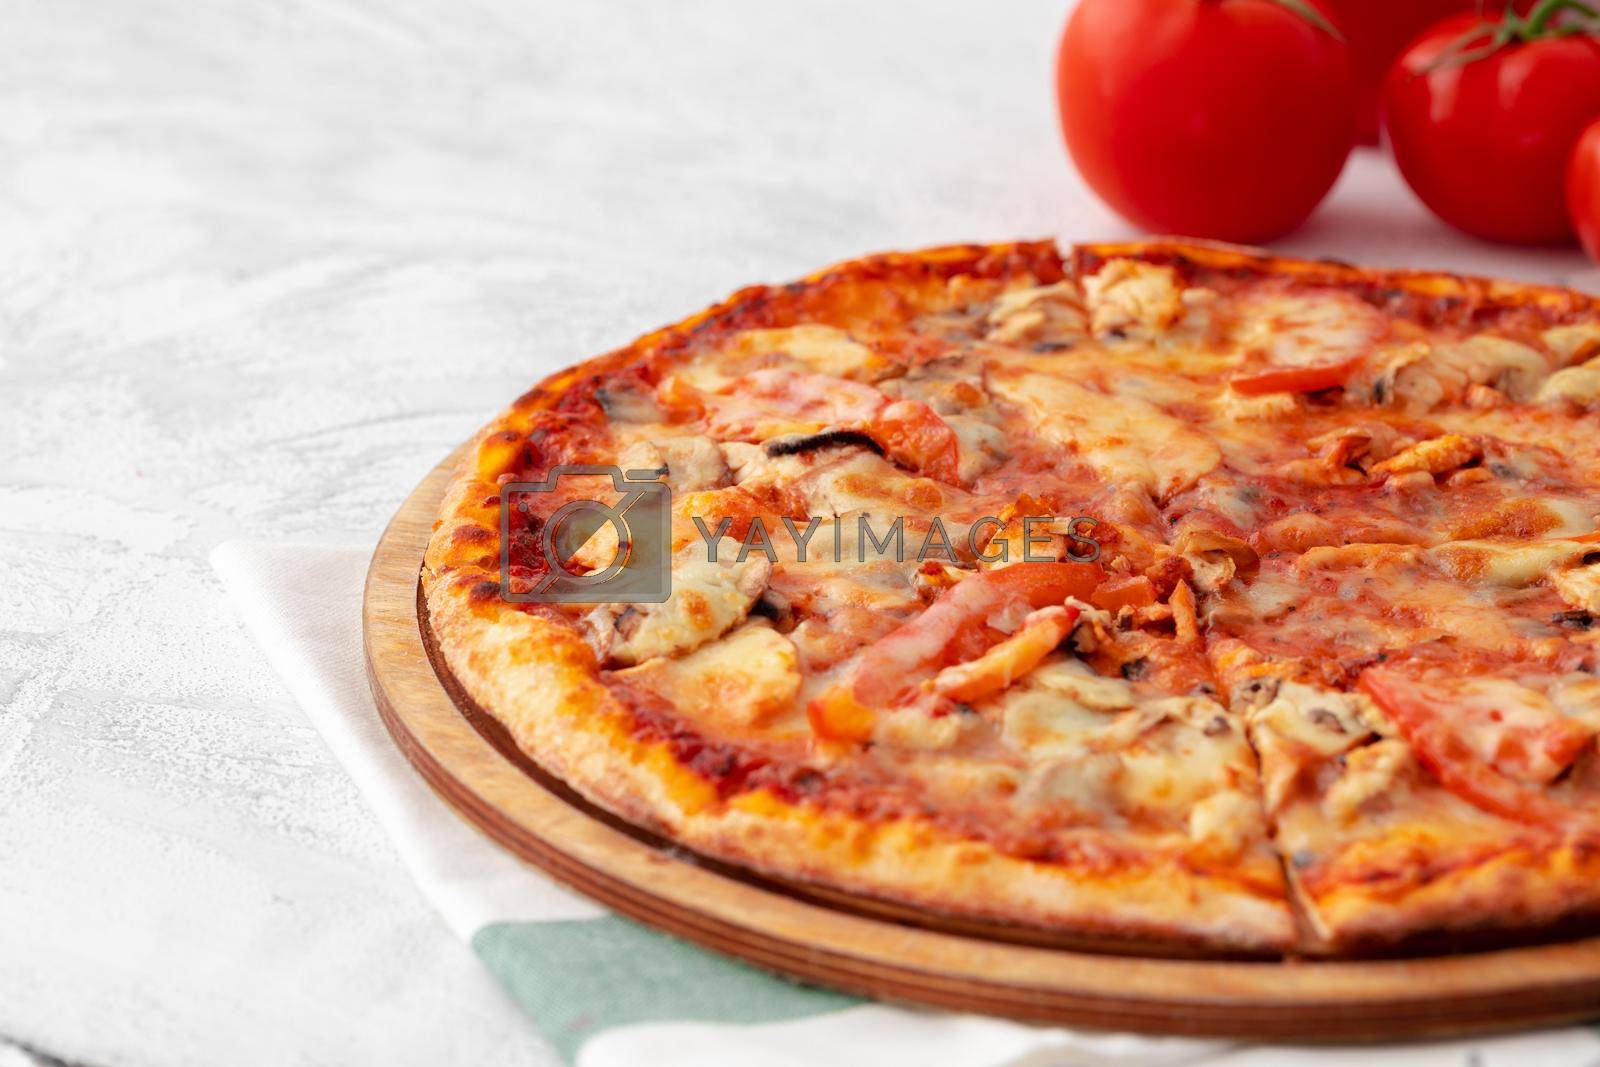 Royalty free image of Freshly baked pizza on table close up by Fabrikasimf